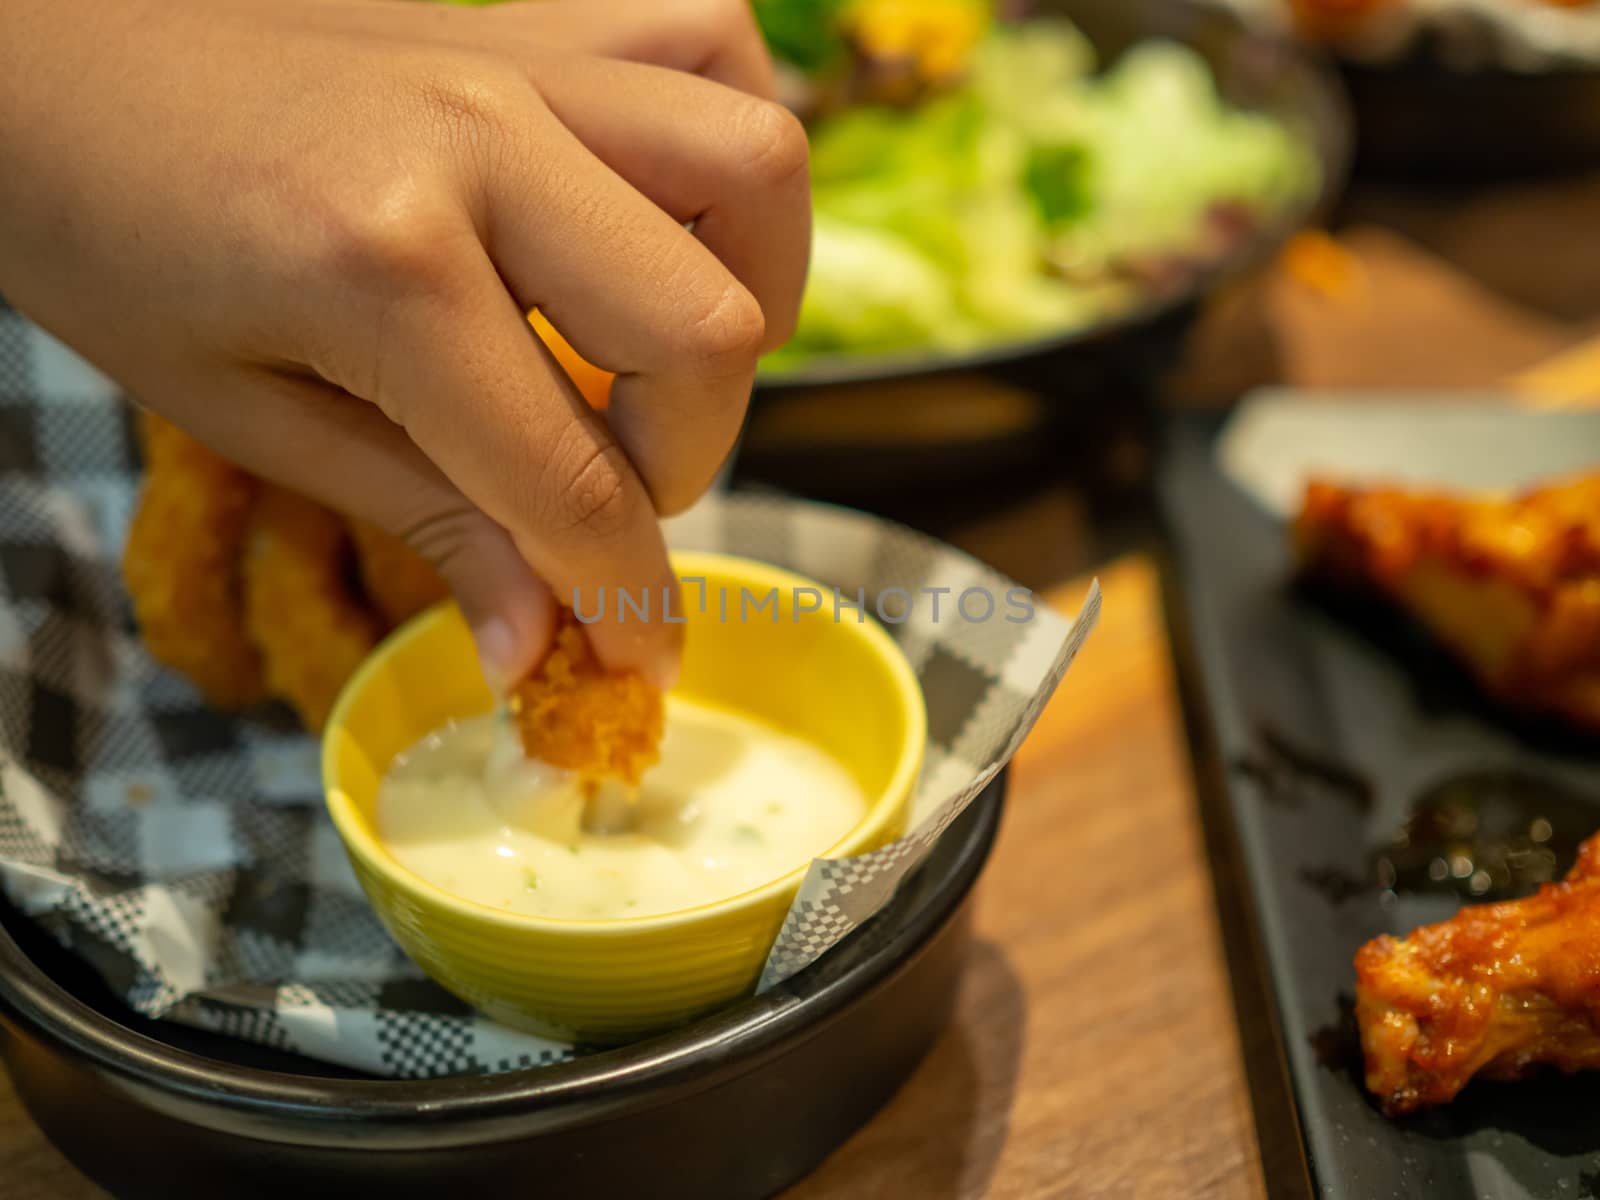 Human hand holding fish finger and dipping on mayonnaise sauce w by Unimages2527